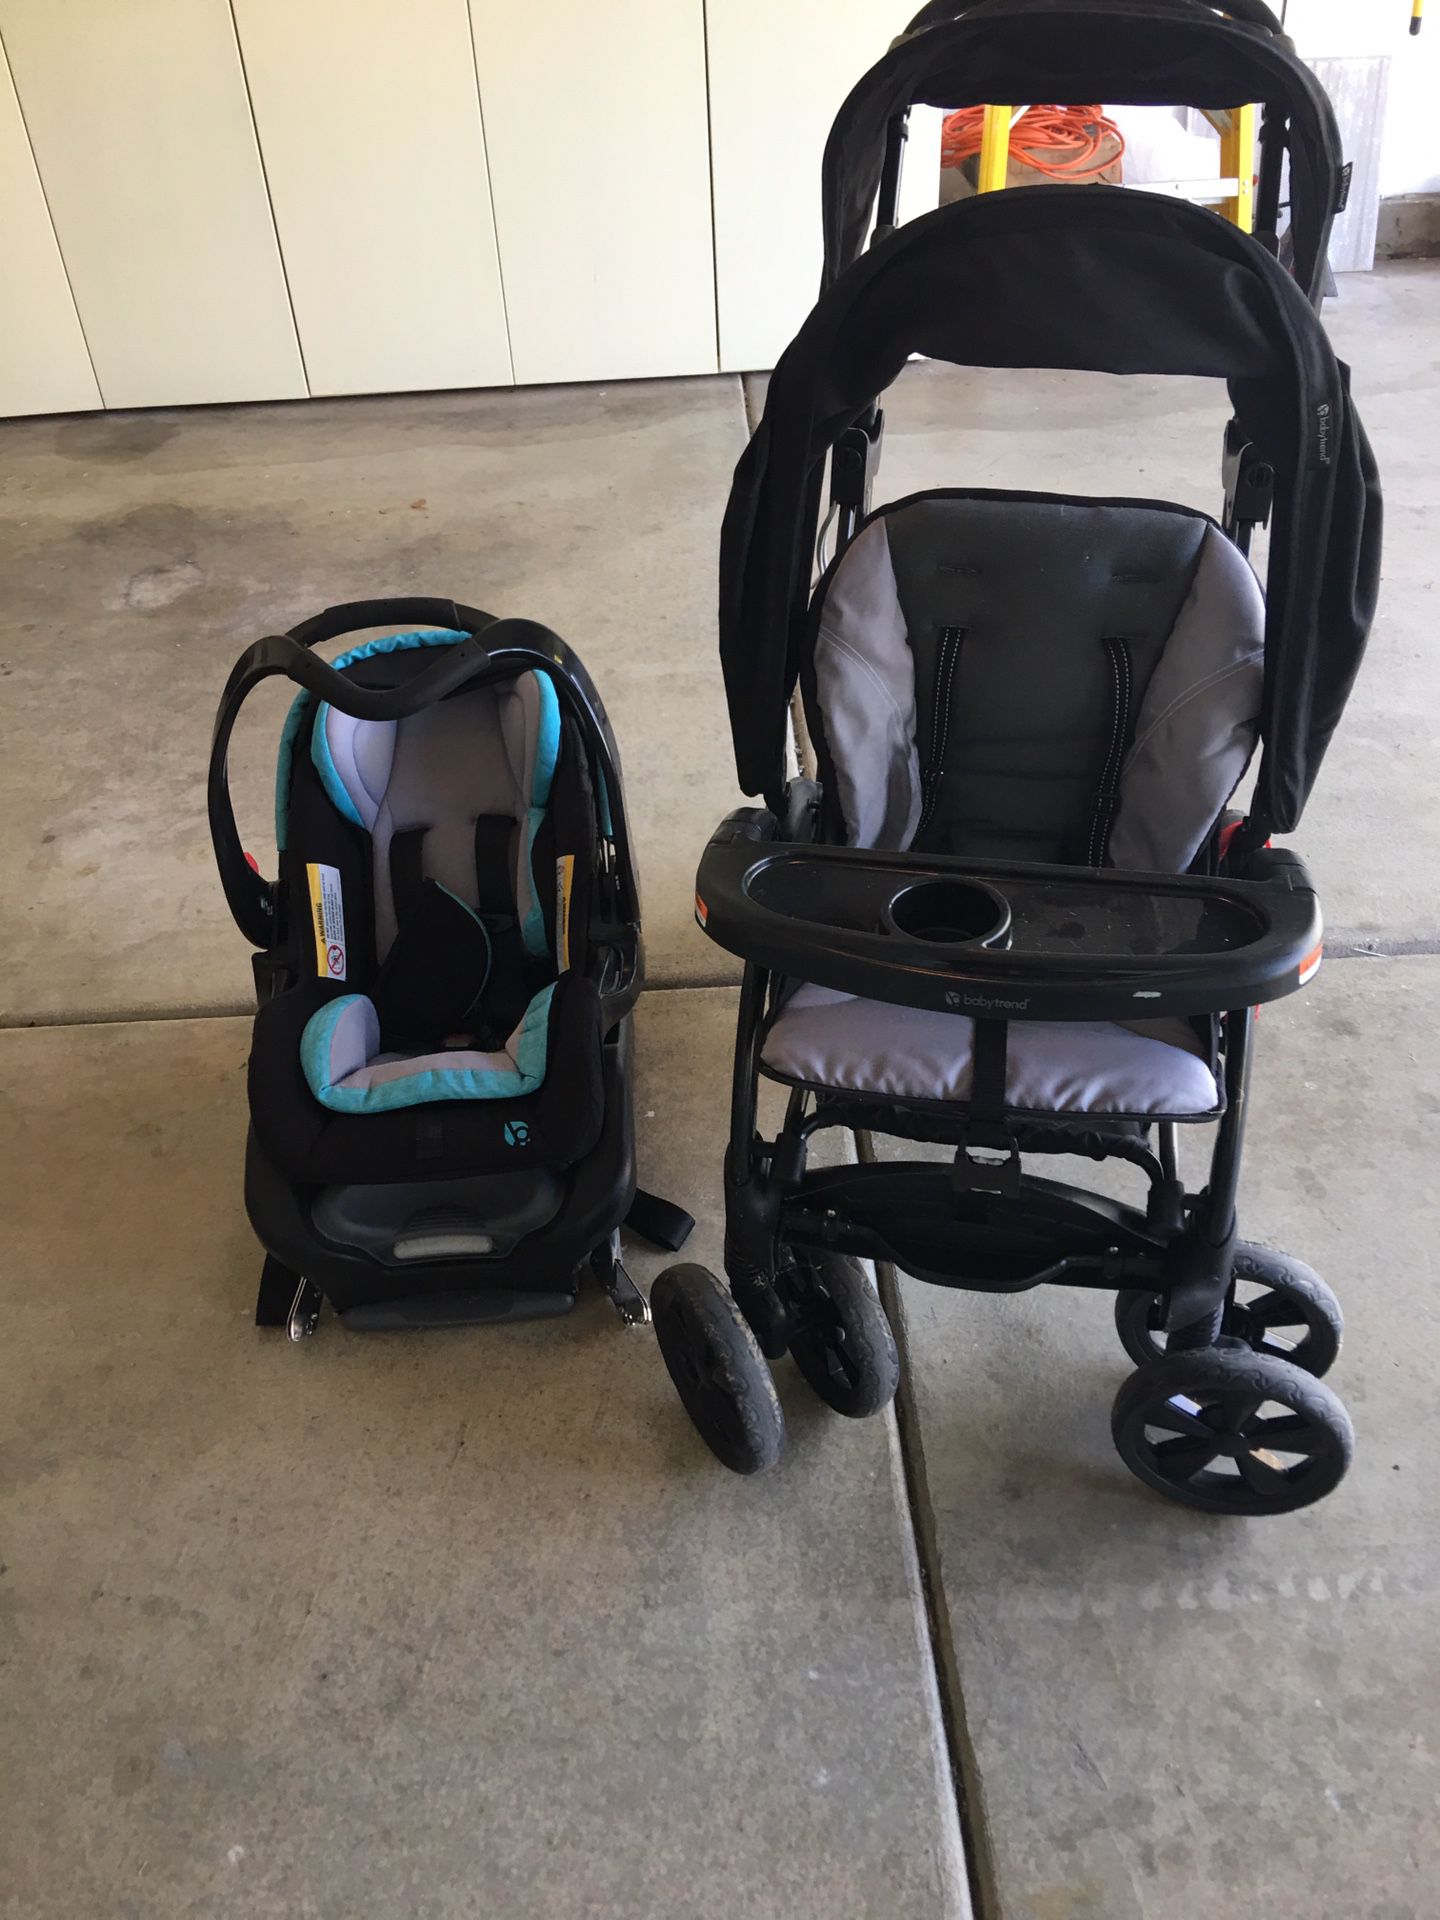 Baby trend double stroller and car seat $ 120 for both like new